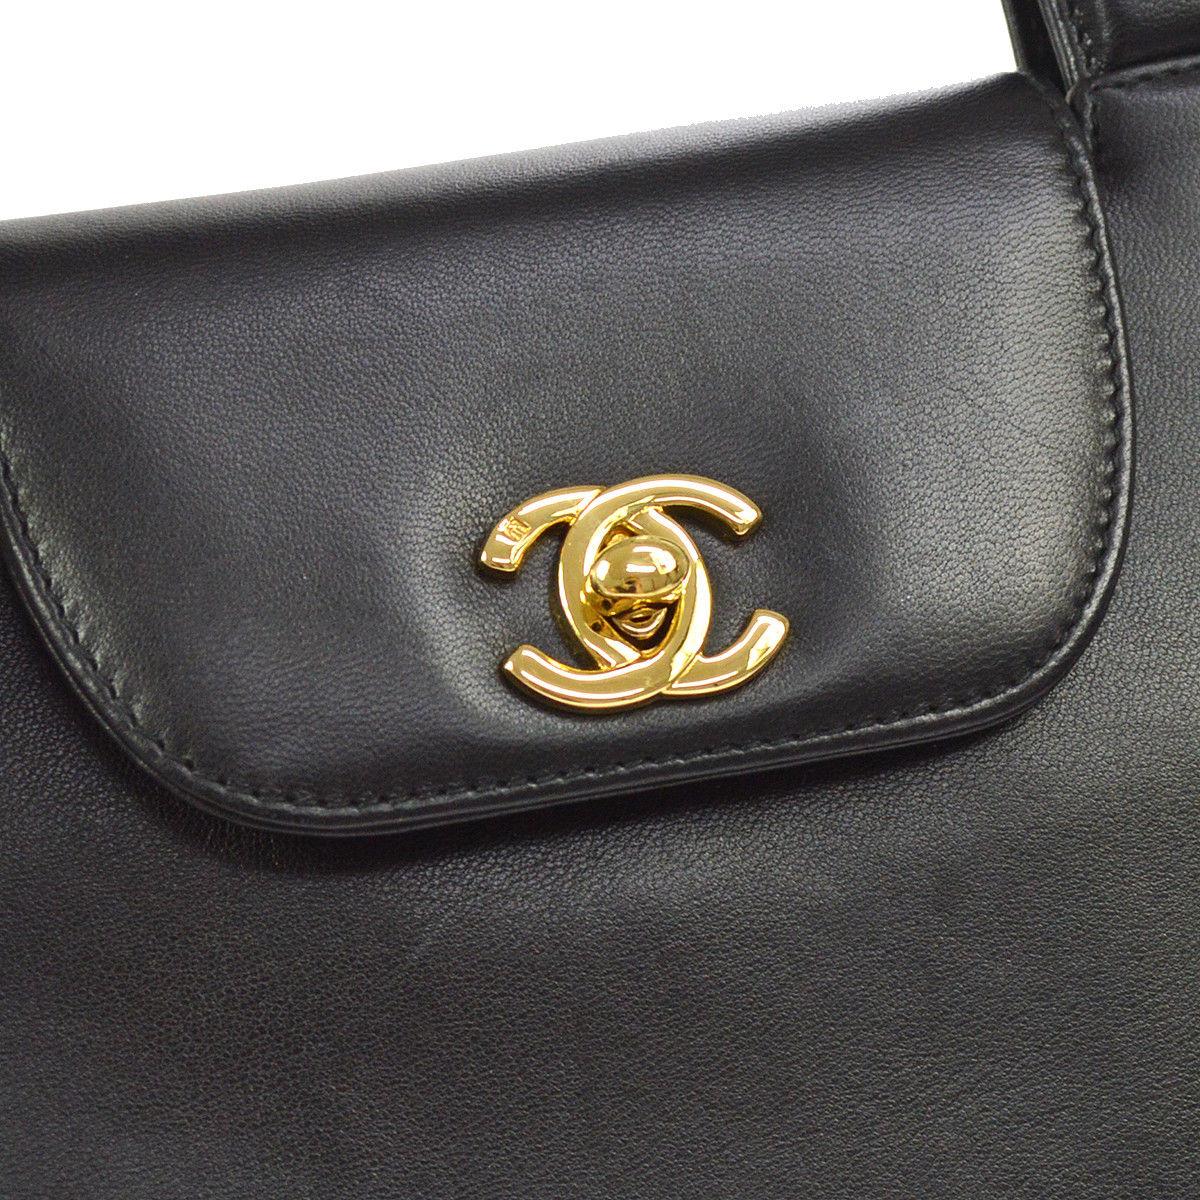 Chanel Black Leather Top Handle Satchel Kelly Style Small Party Evening Bag

Caviar leather
Gold tone hardware
Leather lining
Turnlock closure
Handle drop 3